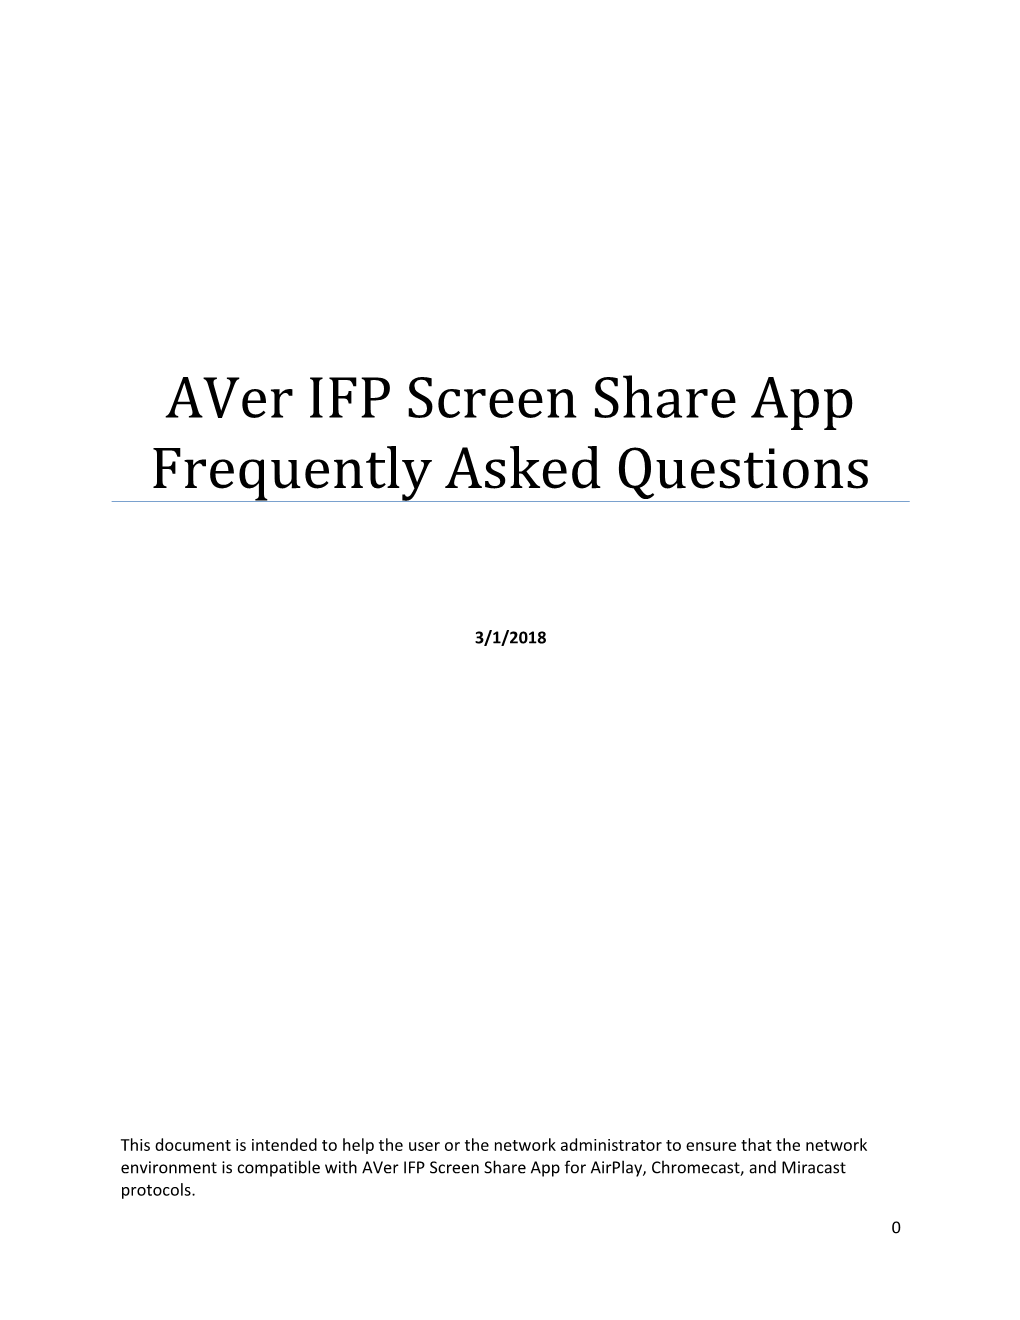 Aver IFP Screen Share App Frequently Asked Questions